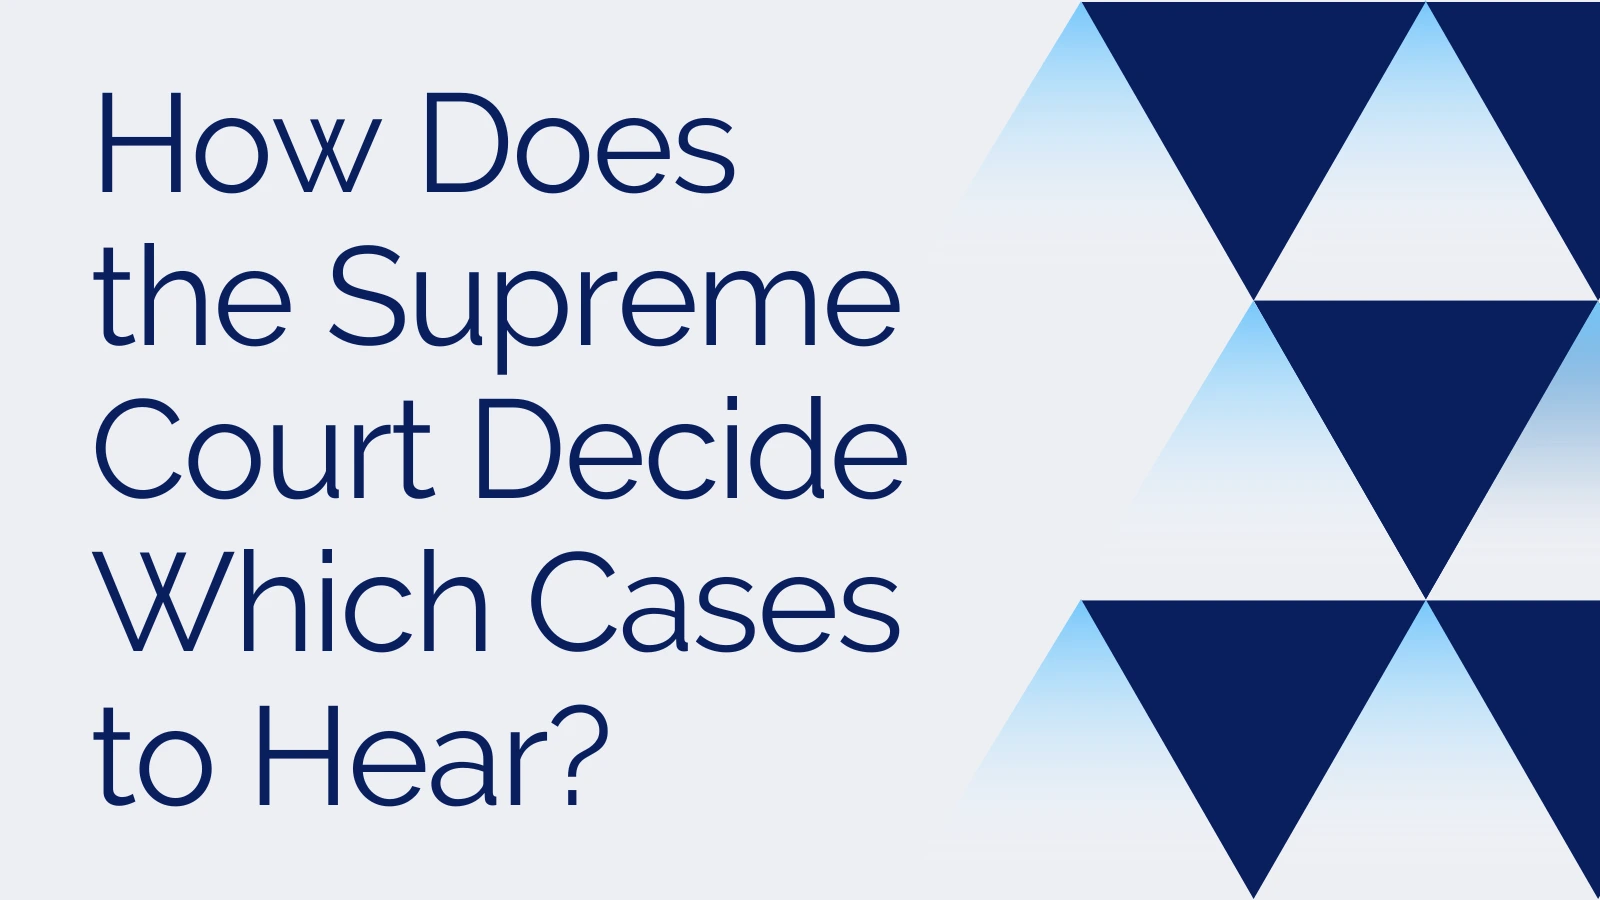 How Does the Supreme Court Decide Which Cases to Hear